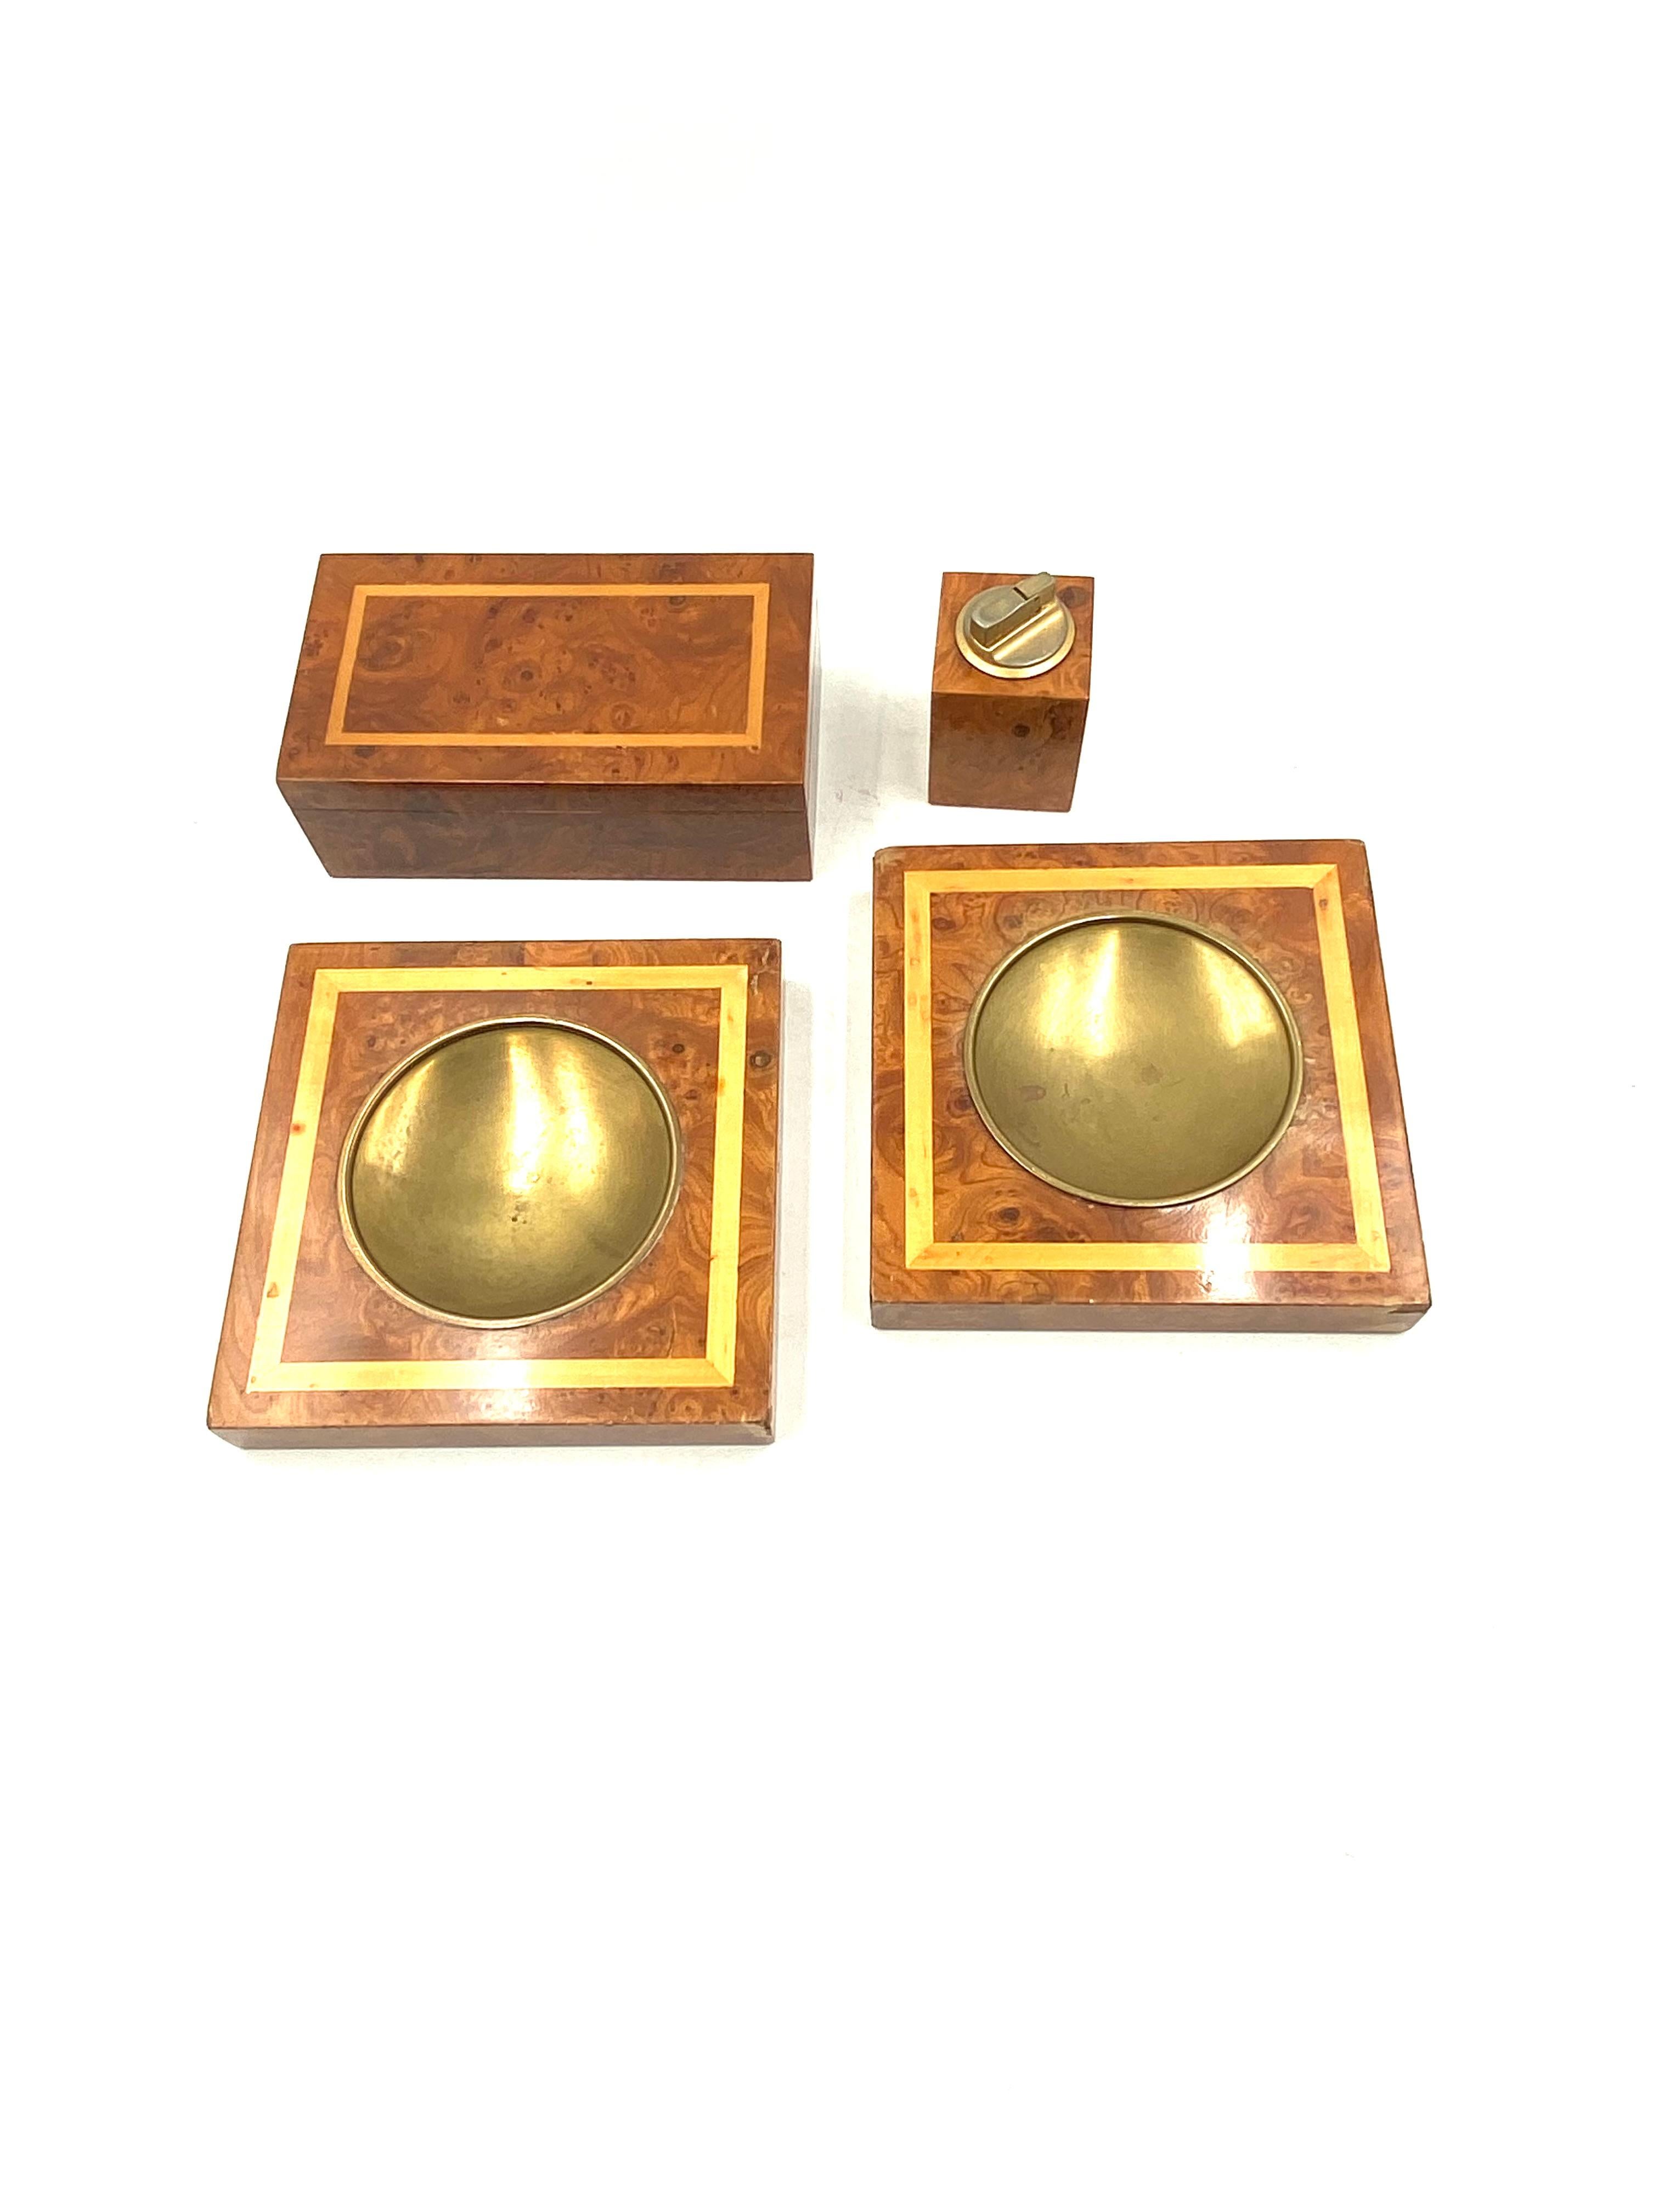 Brass Smoking Set, brass and wood ashtrays, lighter and cigars box, Italy 1970 For Sale